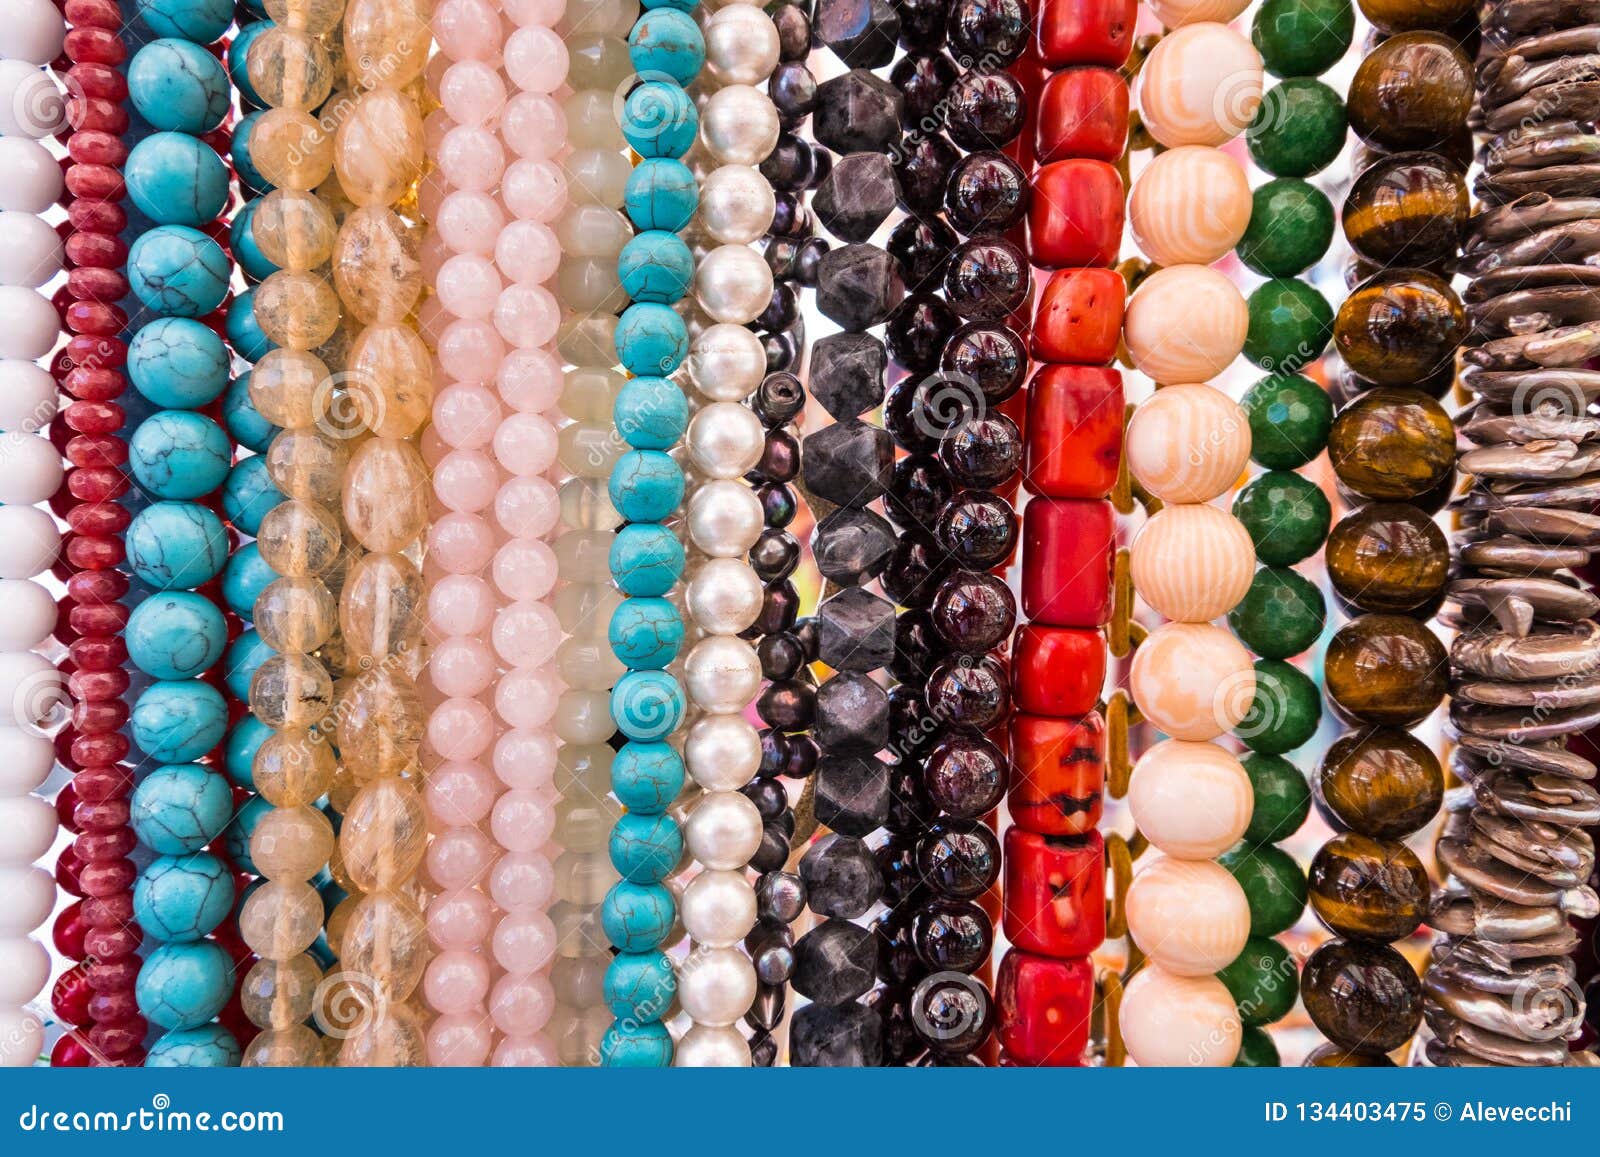 Colorful Beads Necklaces in a Display at a Store Stock Image - Image of ...